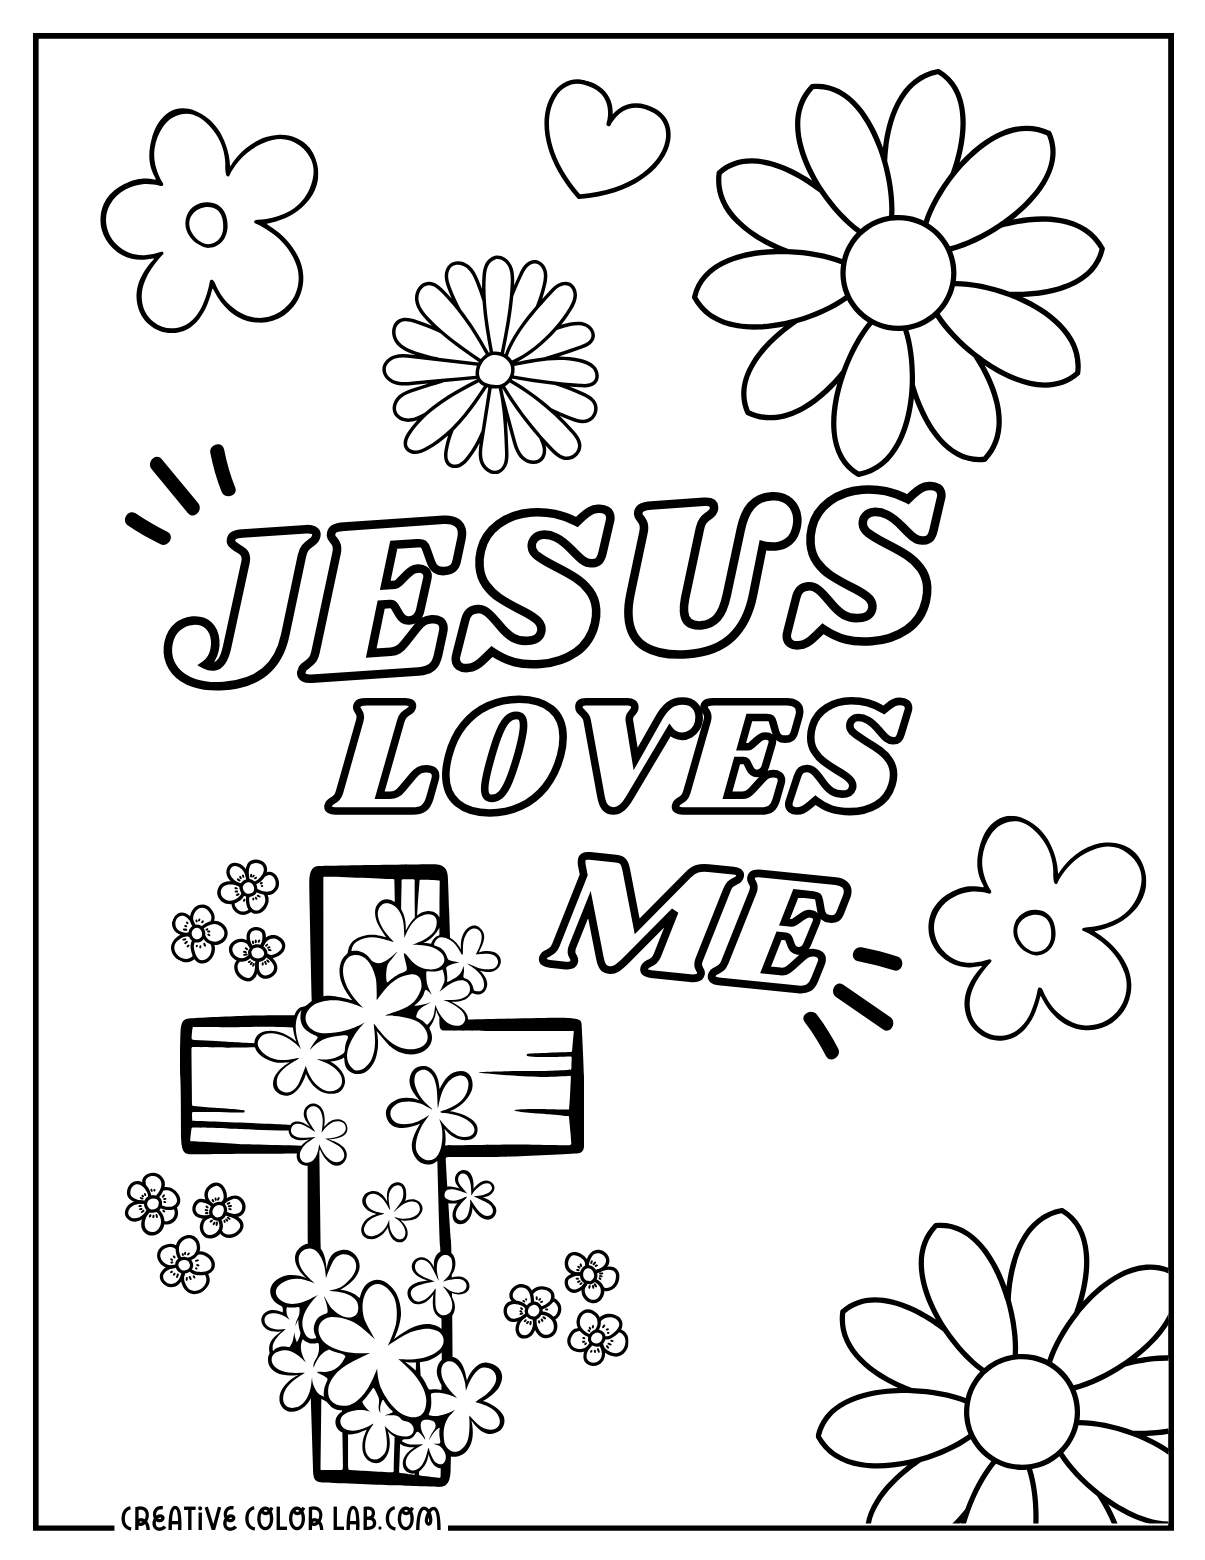 Jesus loves me coloring page with flowers for teens.